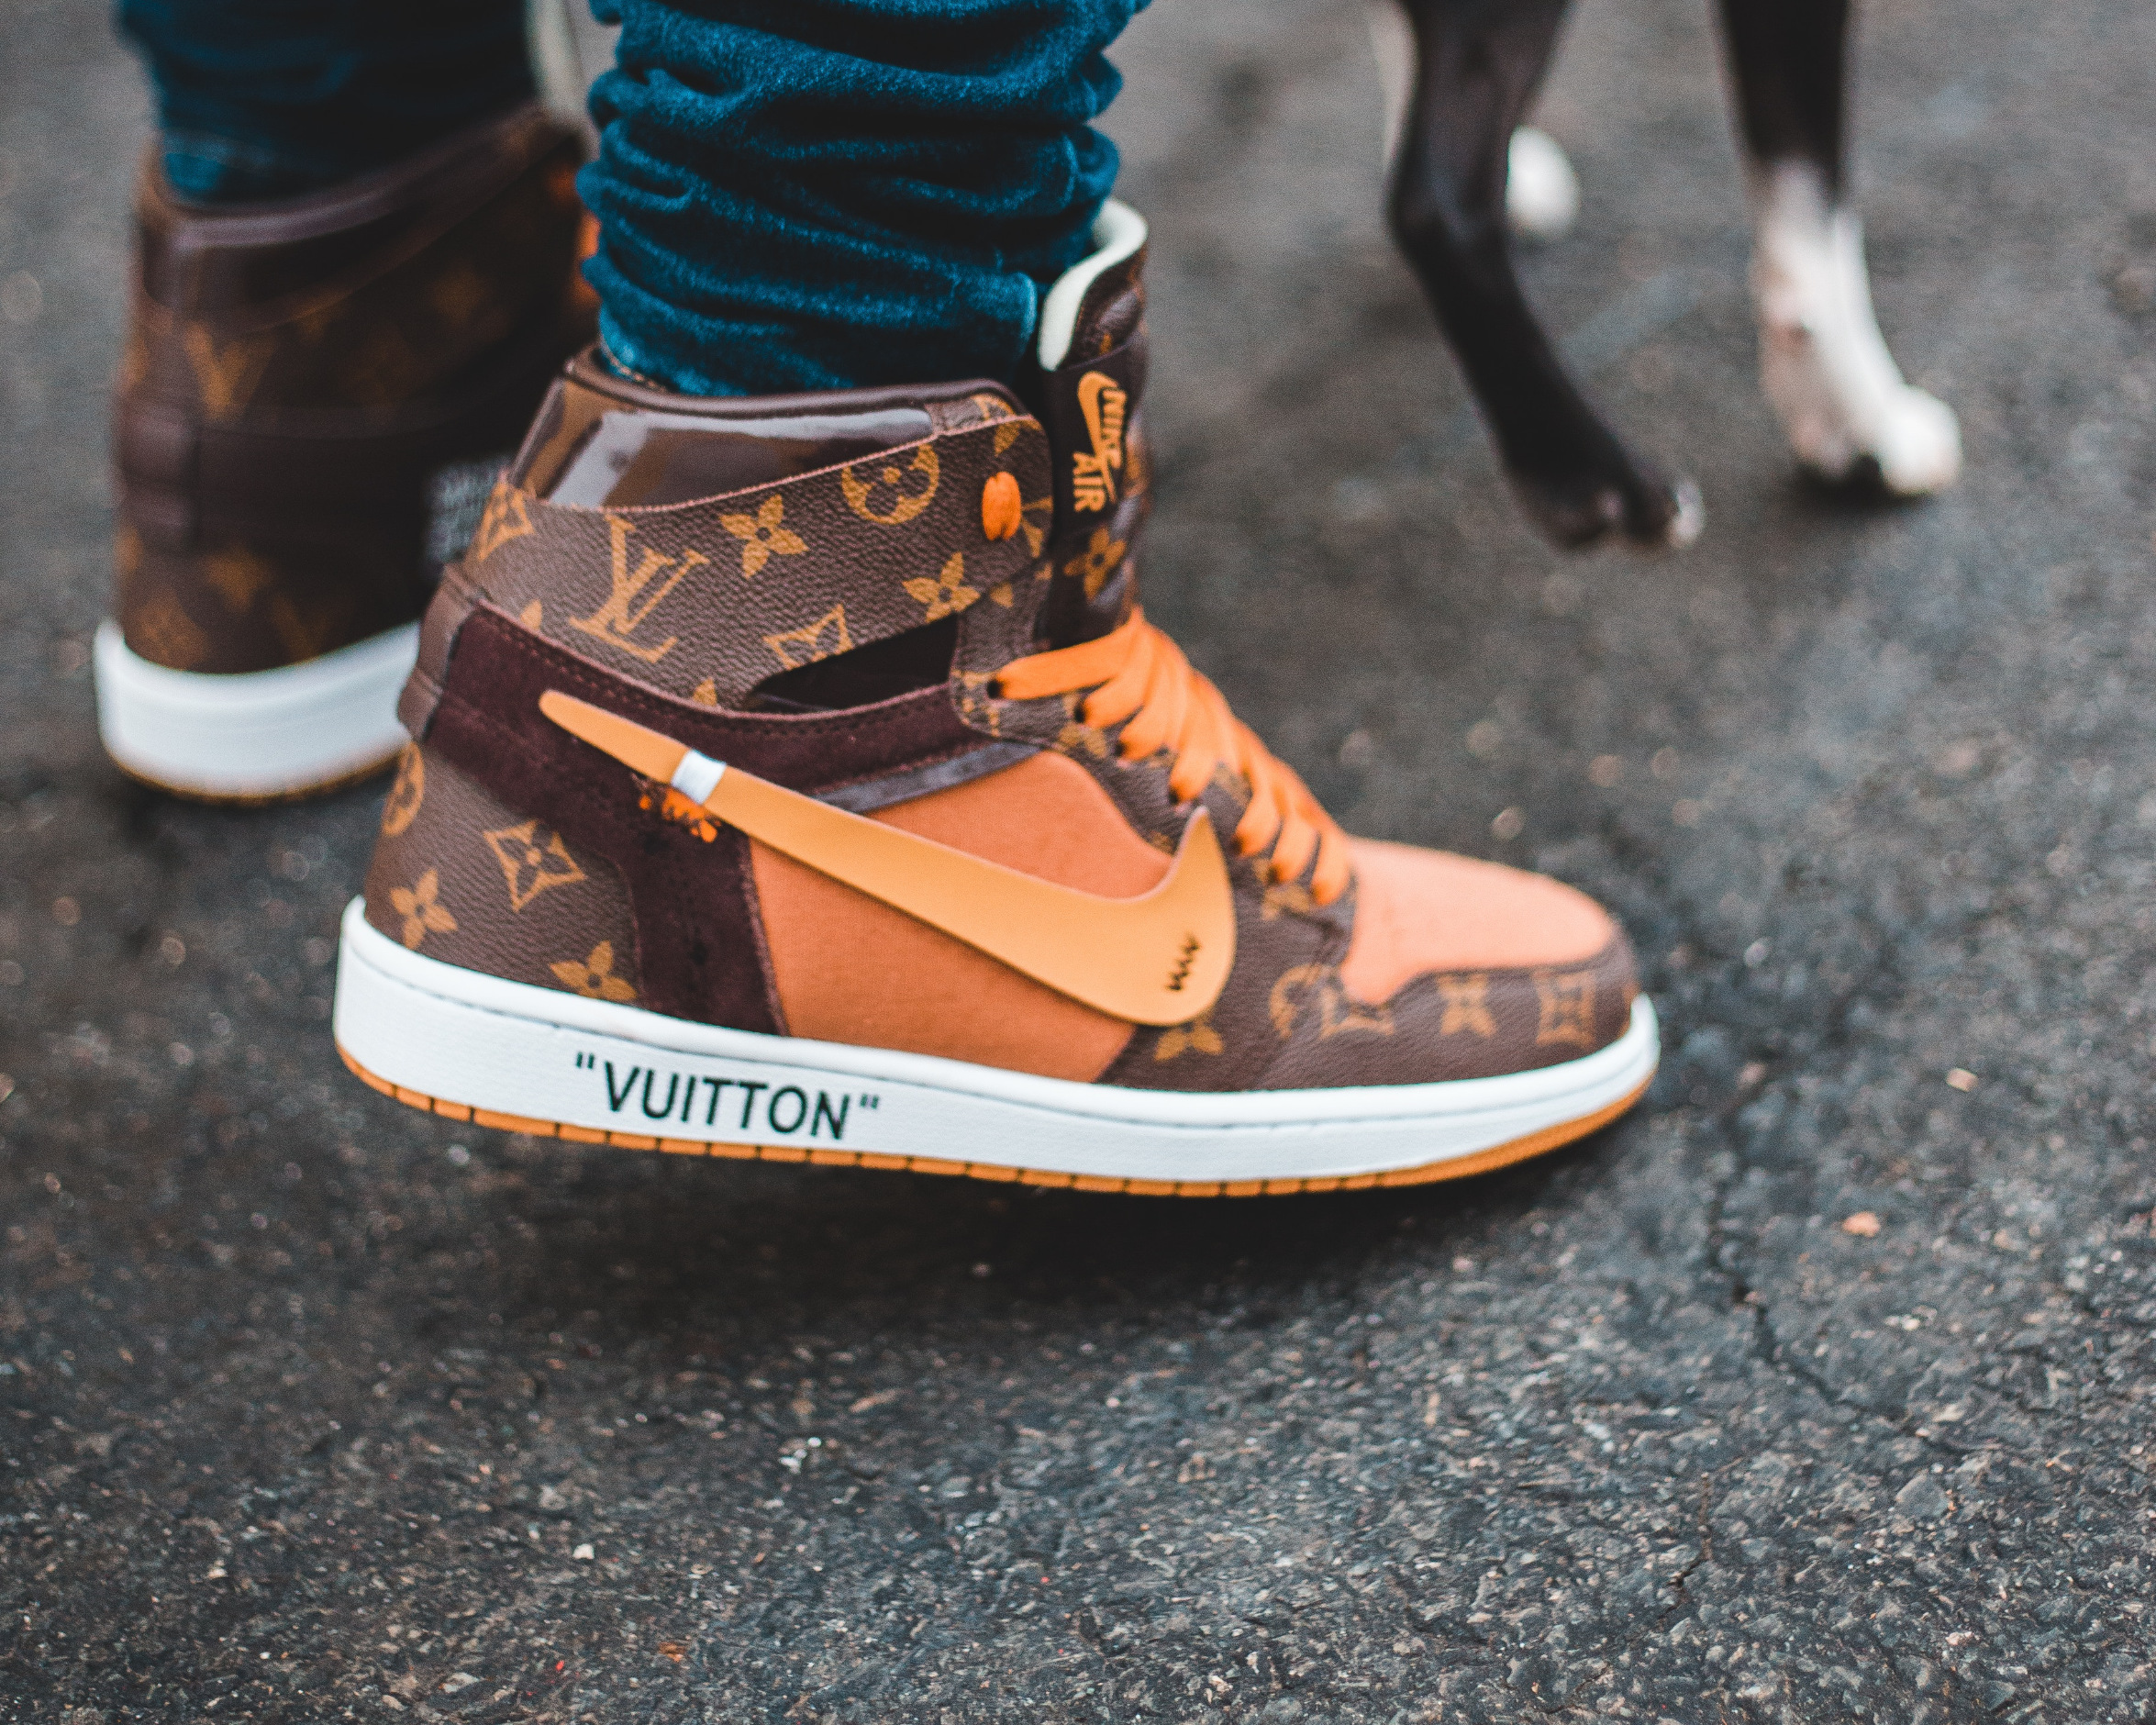 Louis Vuitton Trainer Sneaker - Exclusive Sneakers SA